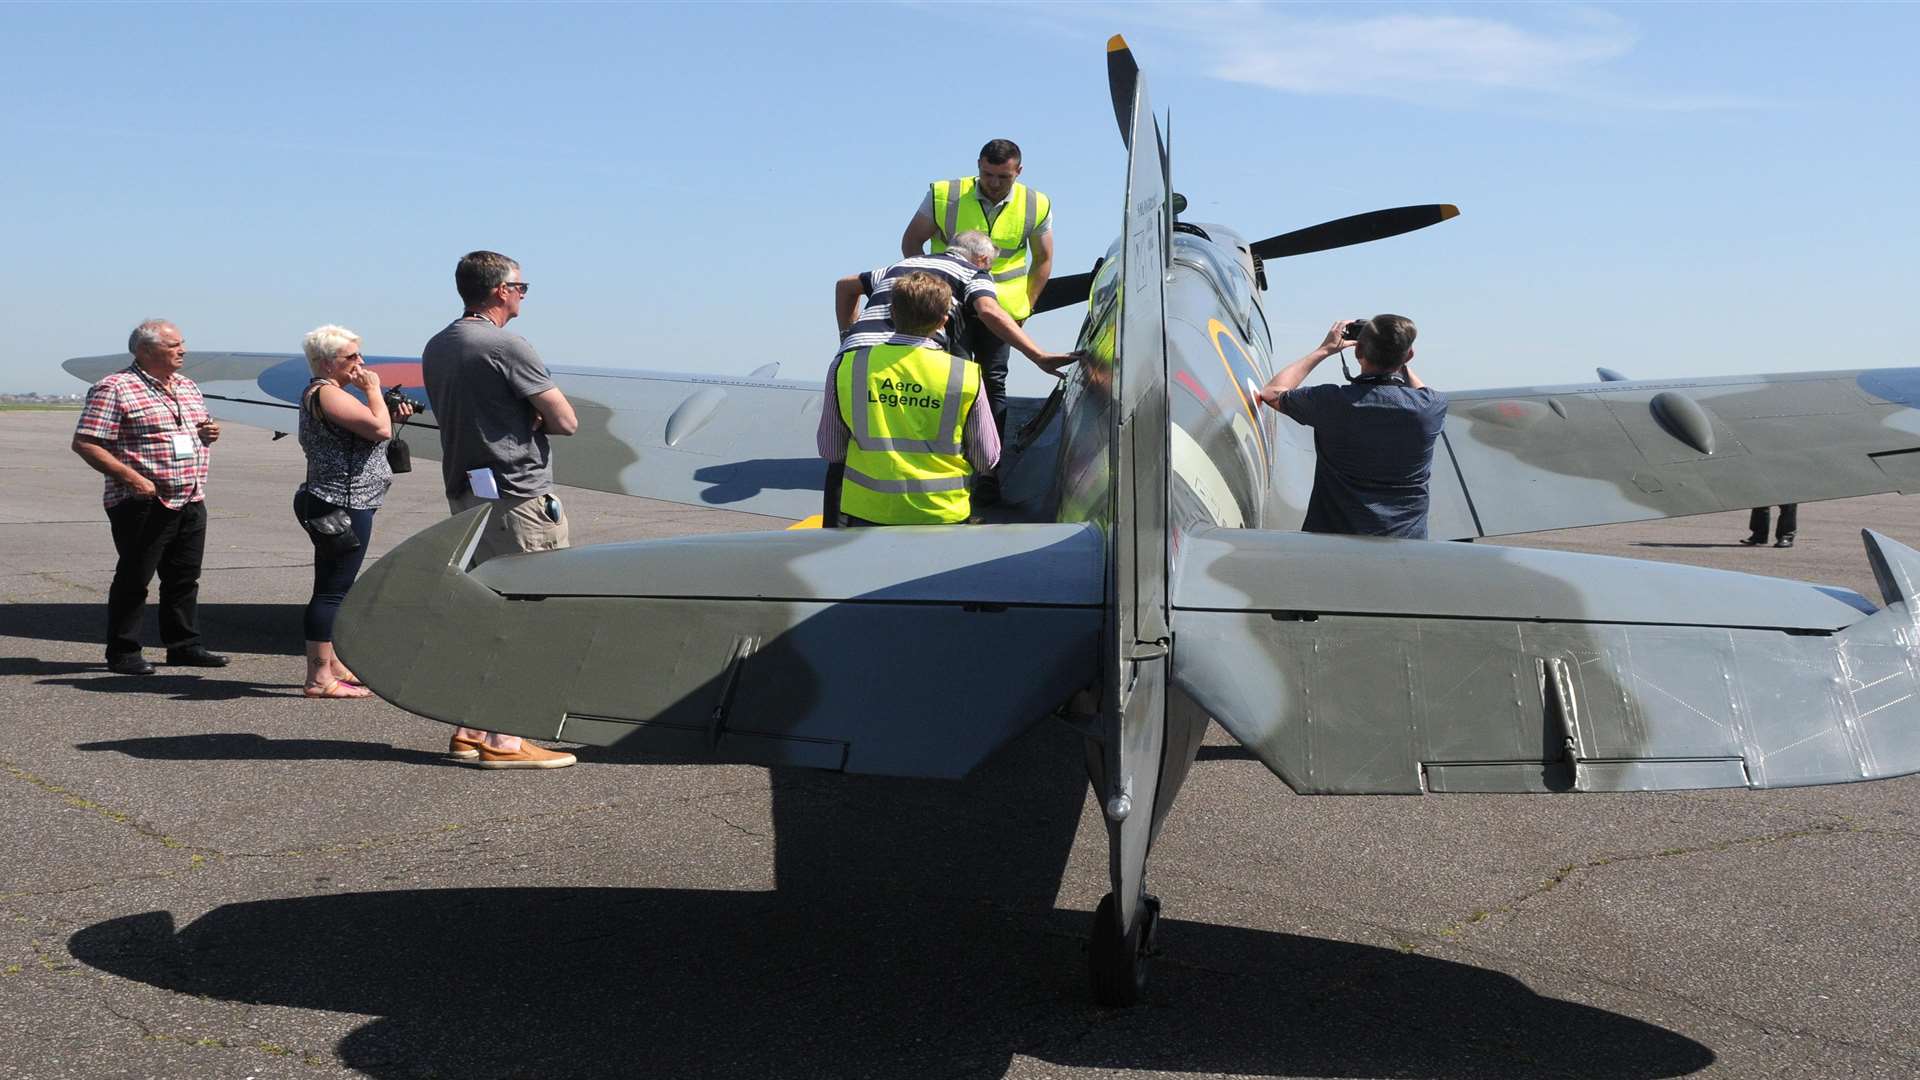 Aircraft enthusiasts had the chance to step into the cockpit of the 1944 Spitfire